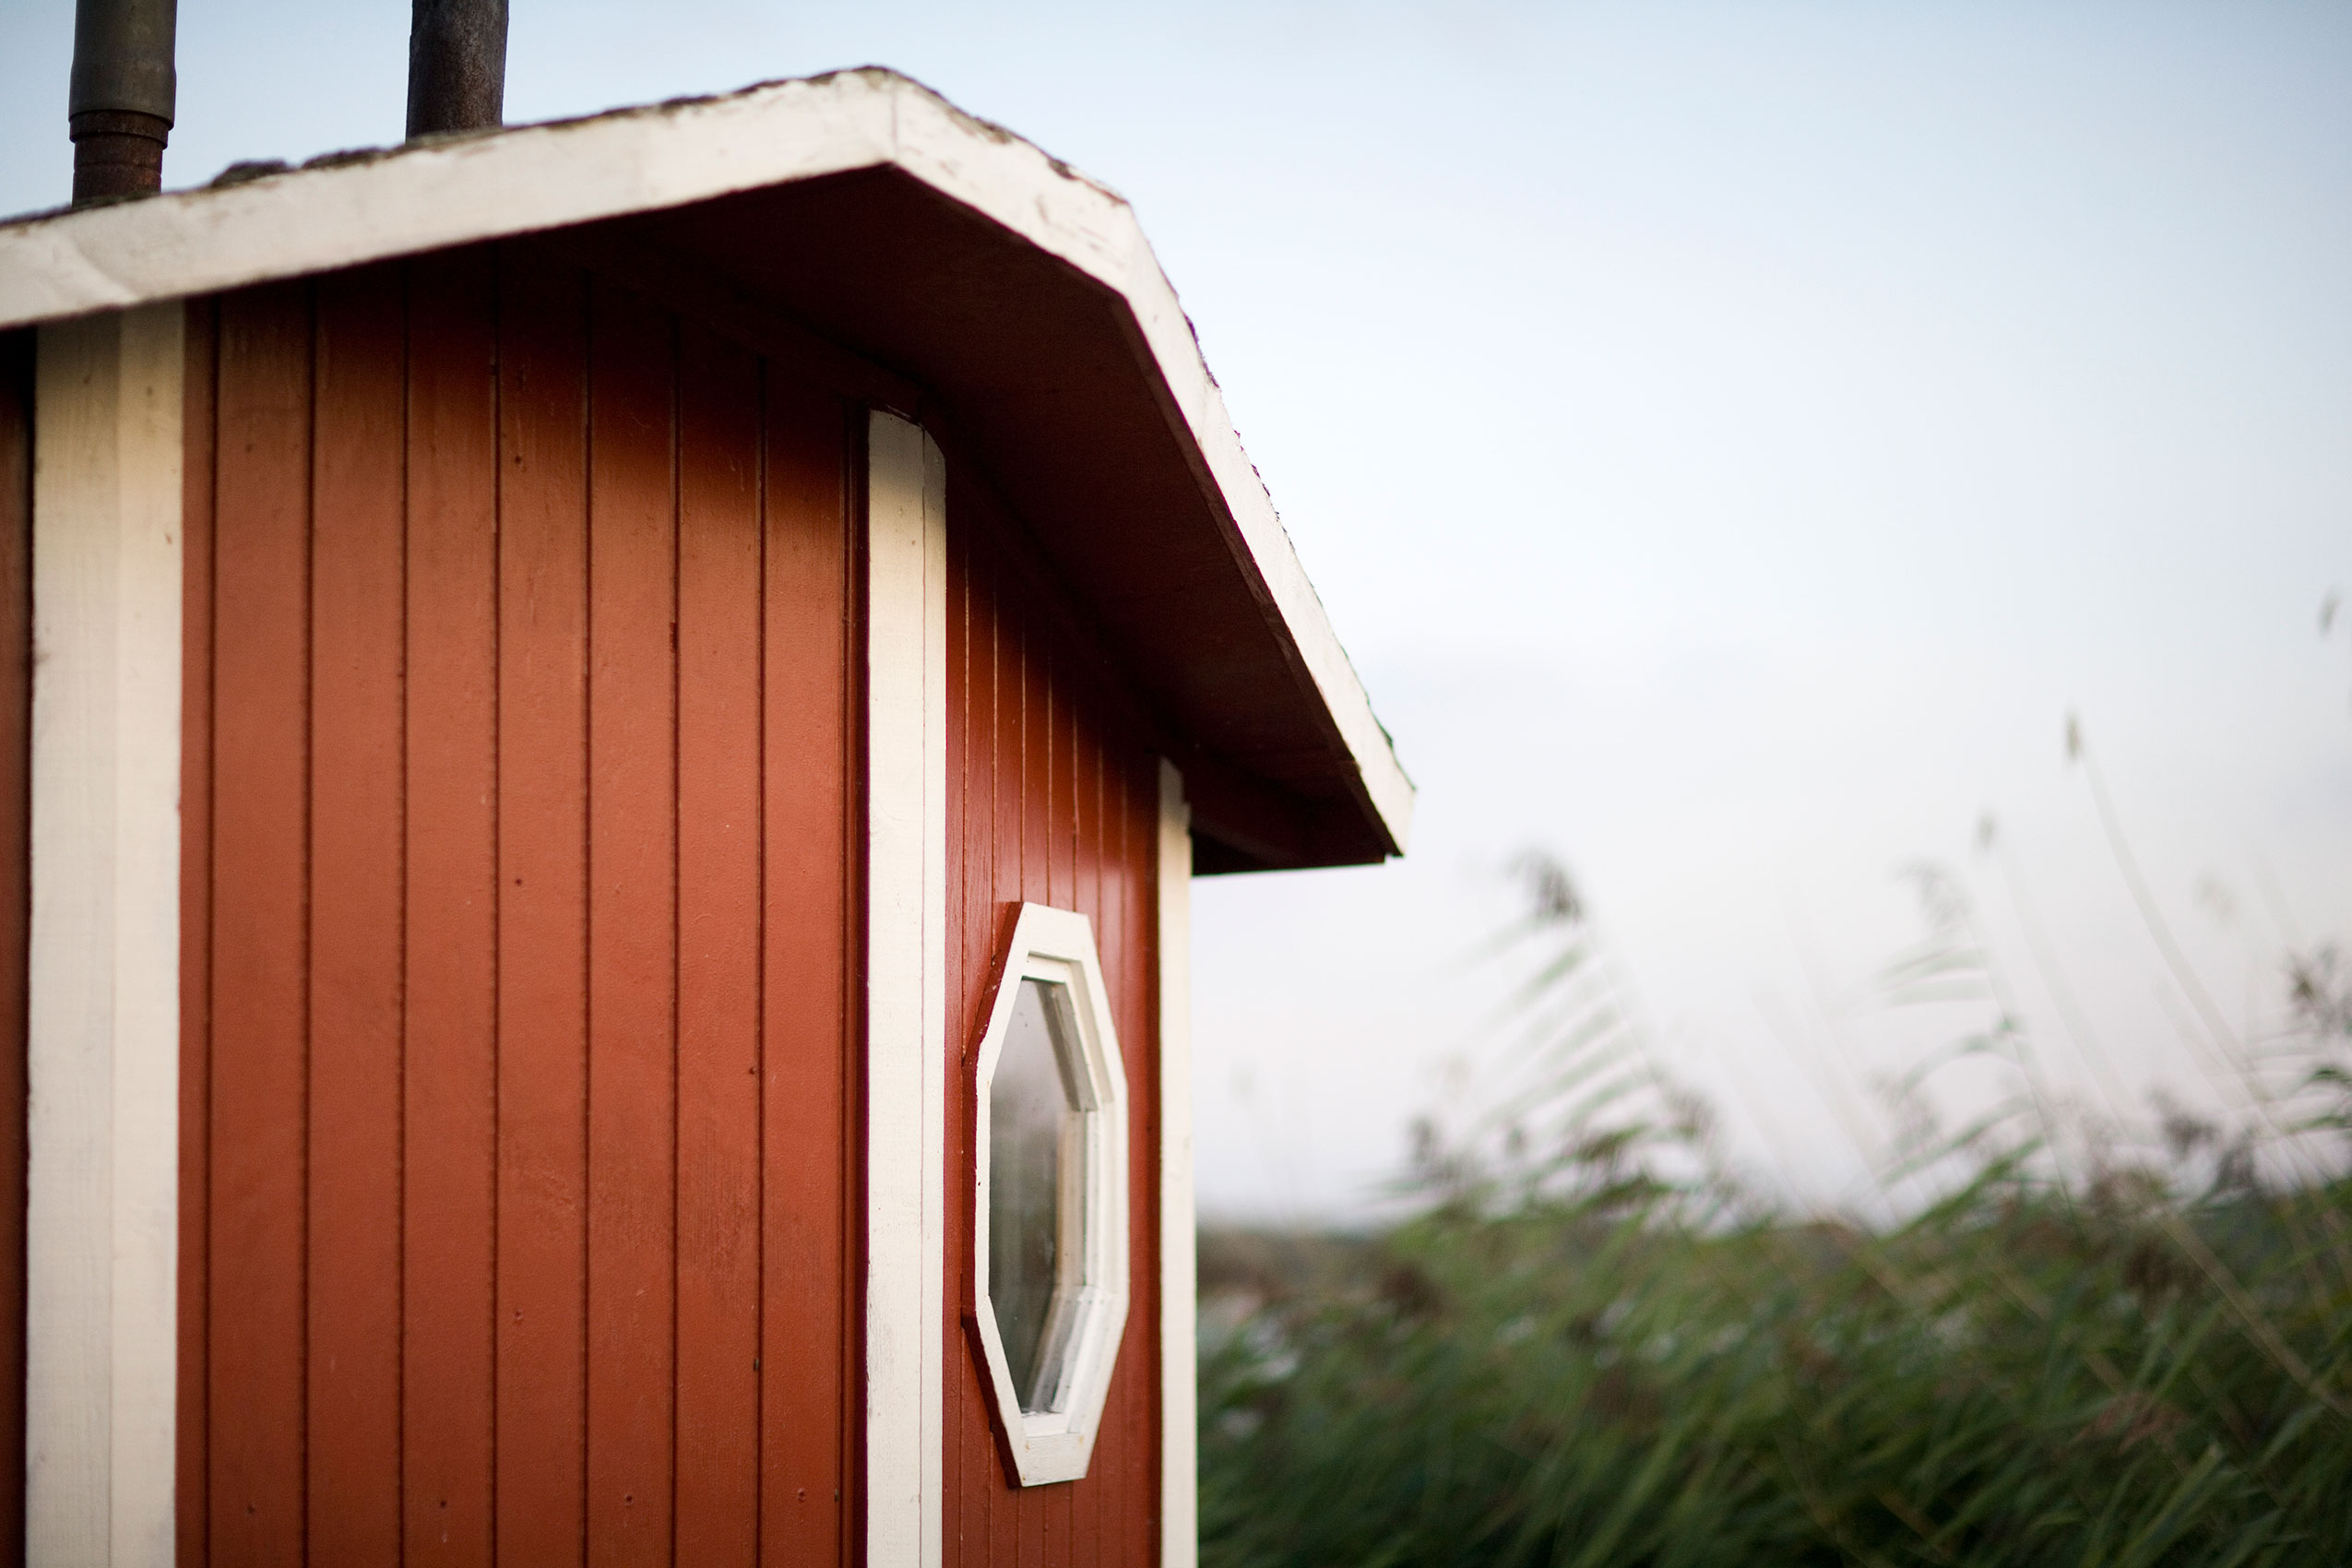 Skaane Red & Cream Wooden Cottage • Lifestyle & Documentary Photography